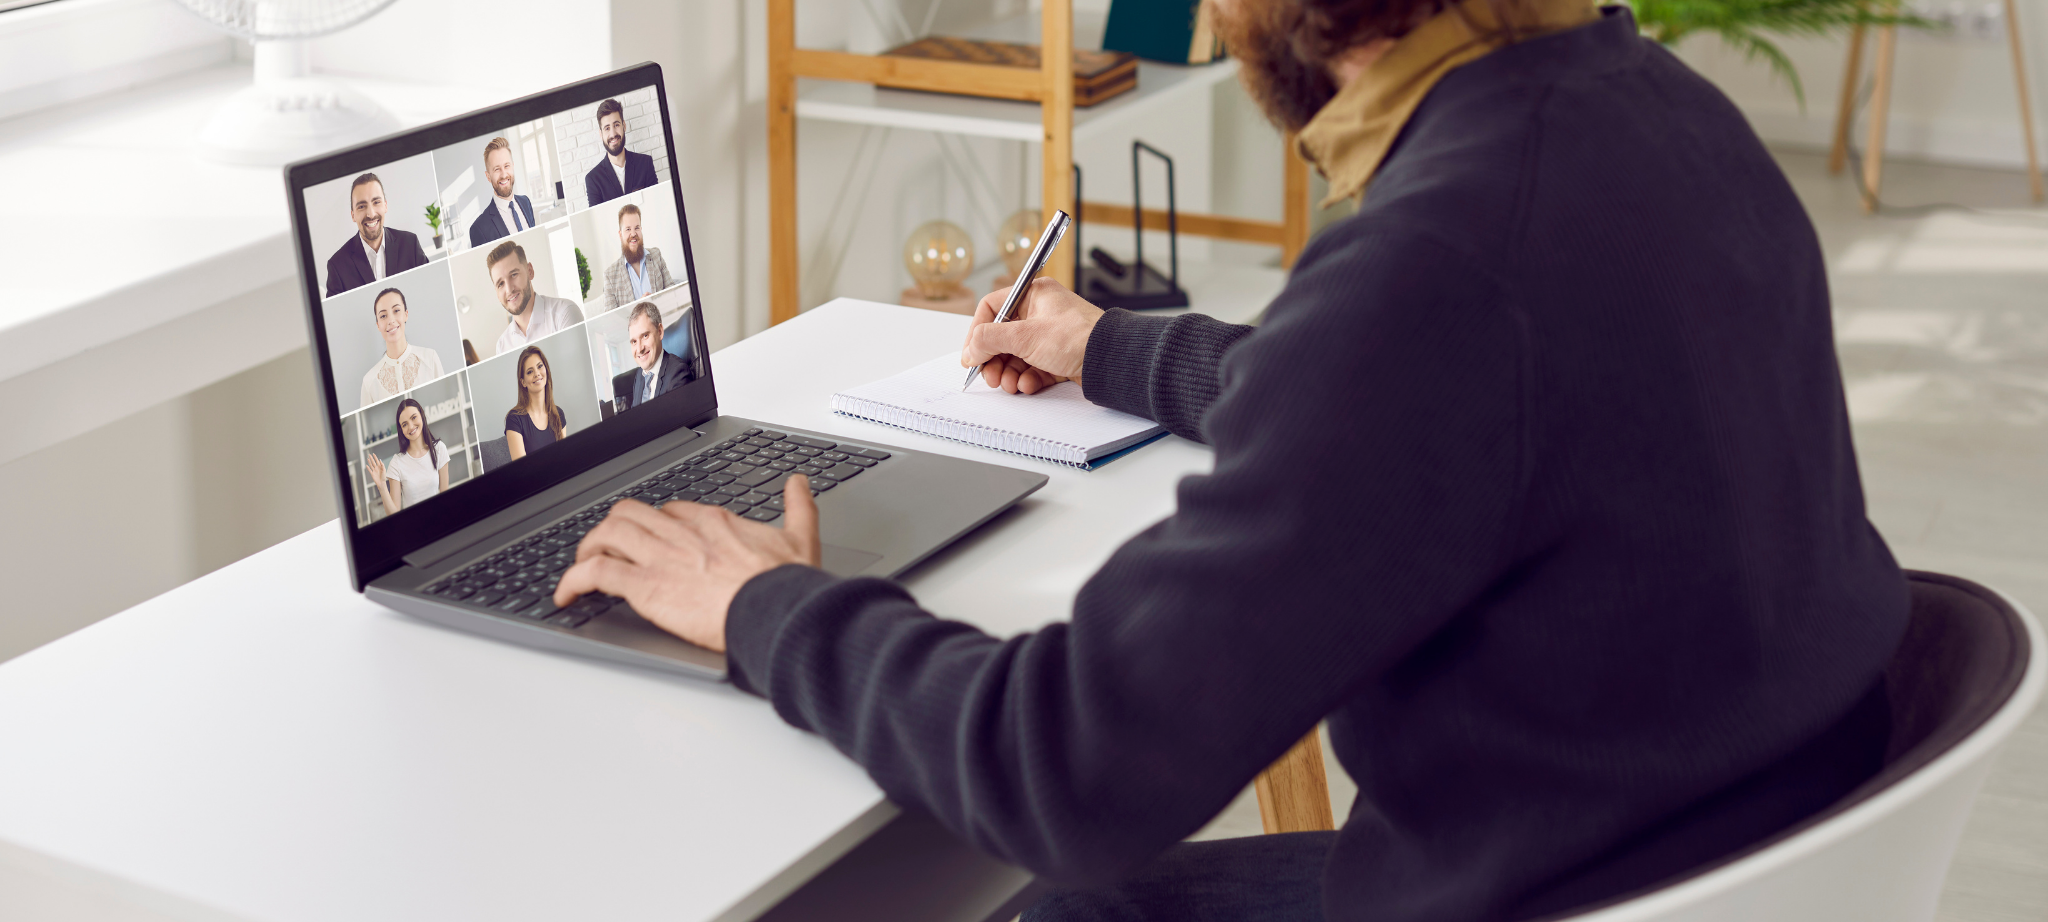 Online Team Builders: A Guide to Remote Team Building